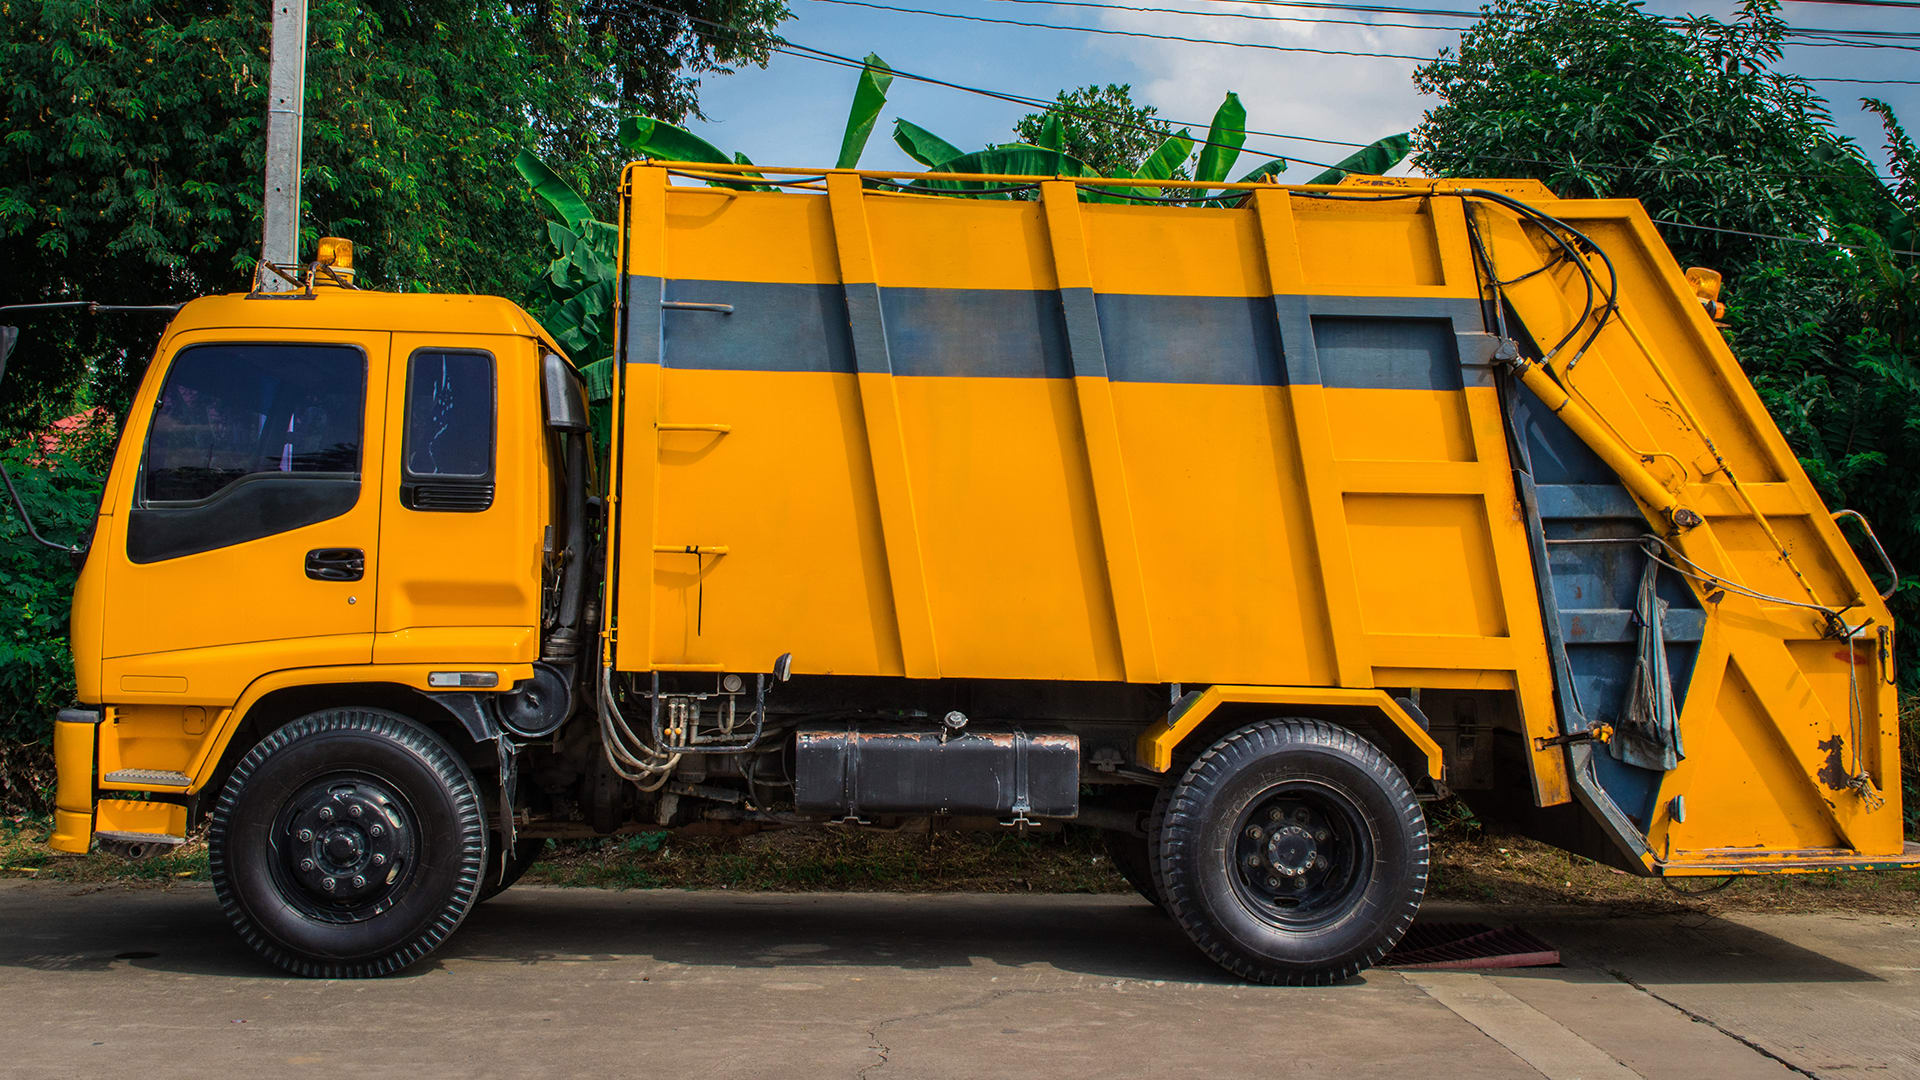 What do garbage trucks do with garbage?